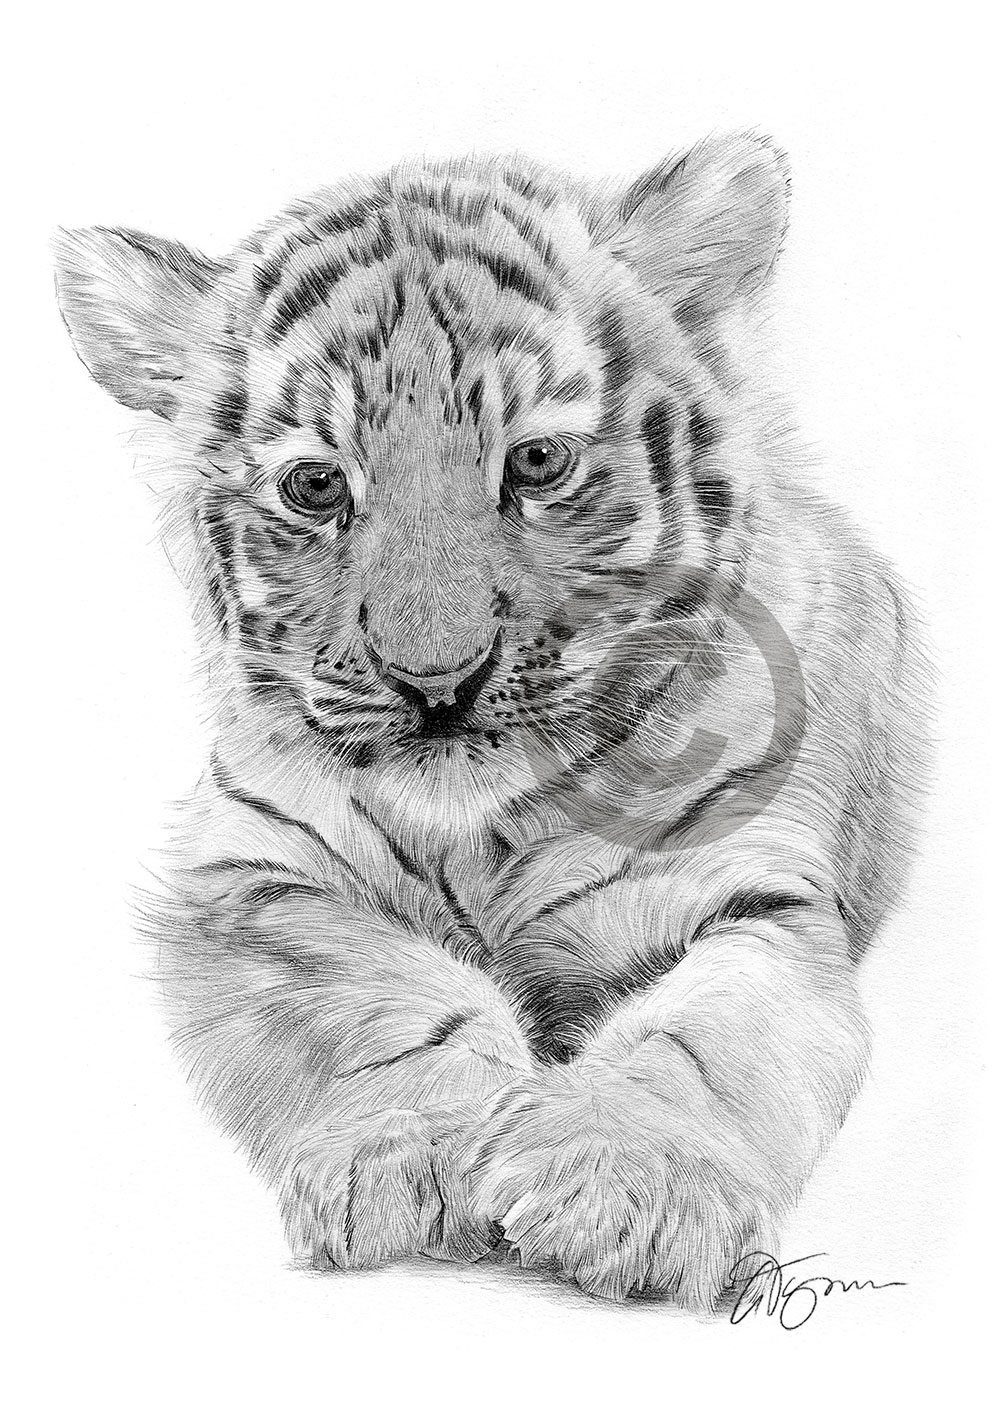 Pencil drawing of a Bengal tiger cub by artist Gary Tymon